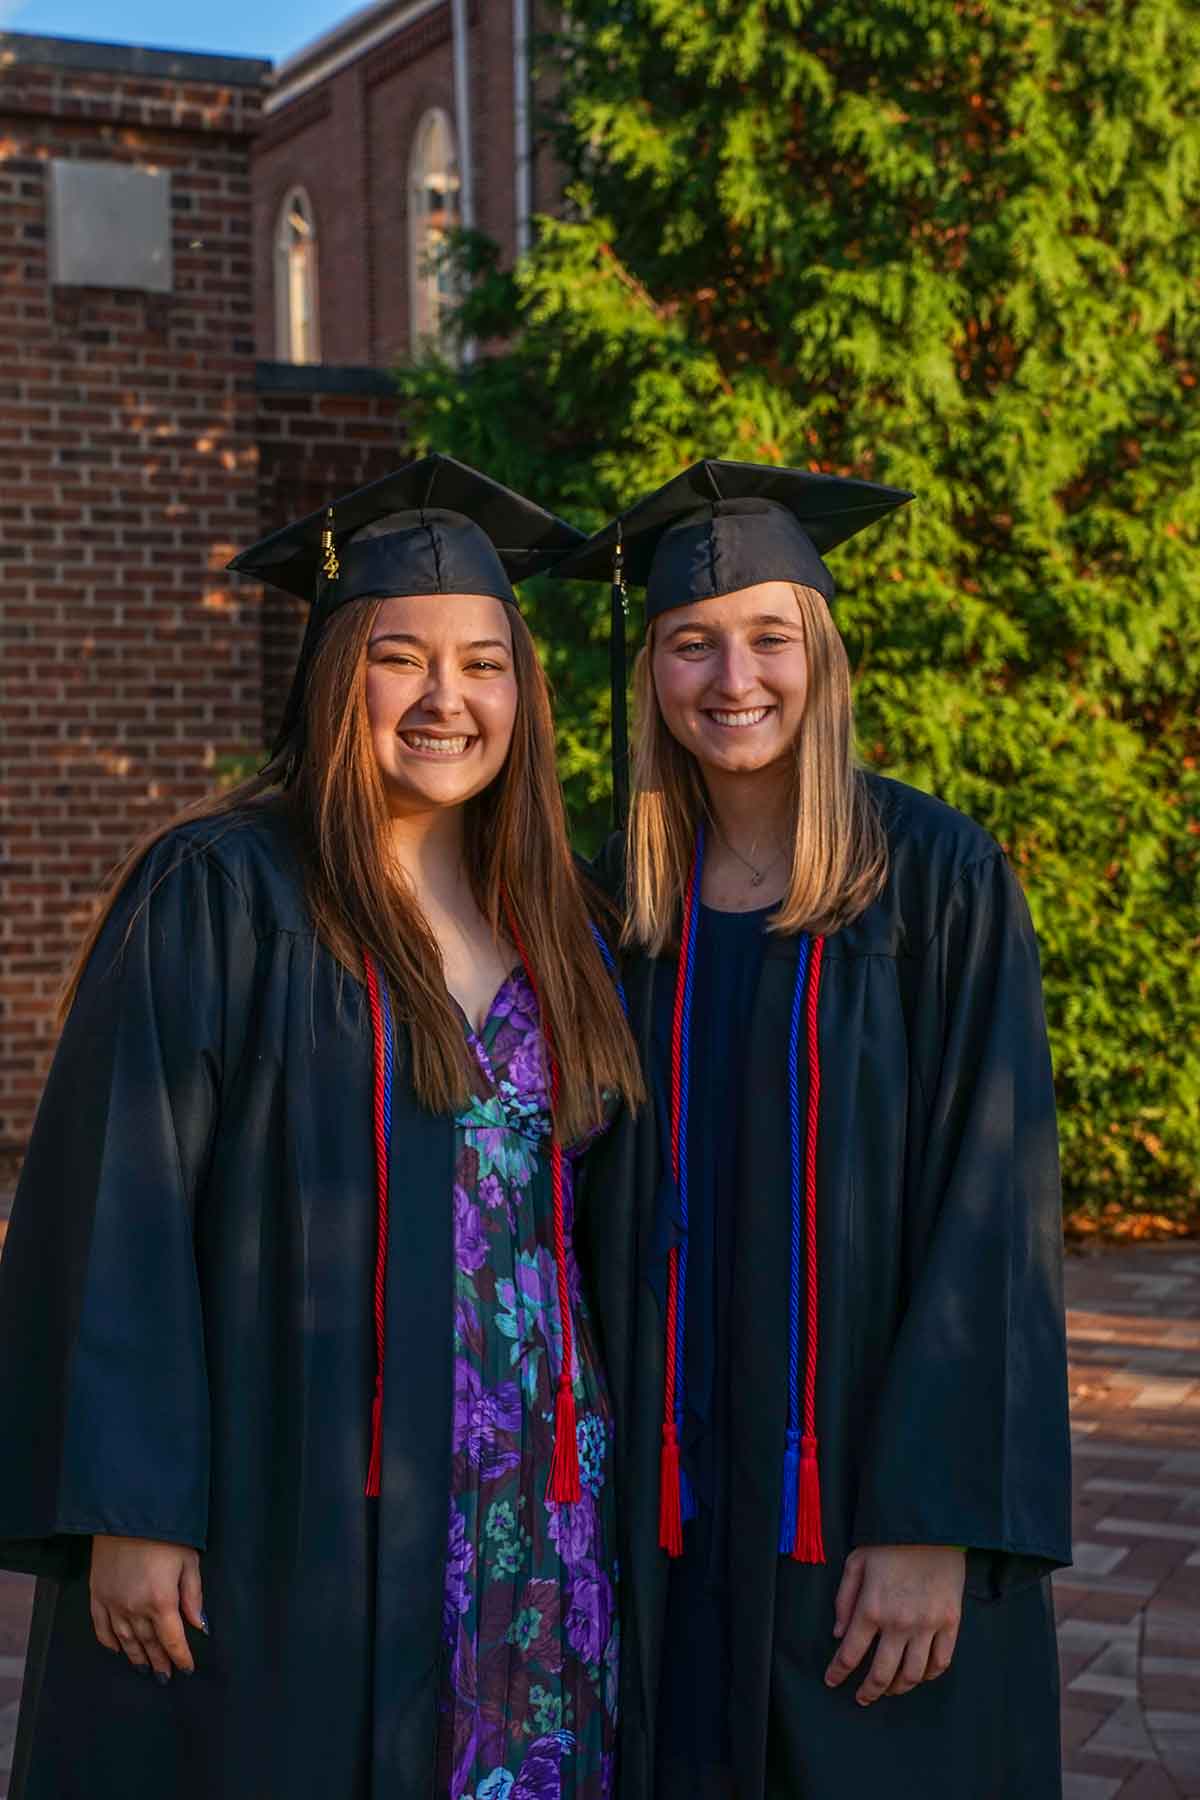 Two students stand in graduation gowns and hats